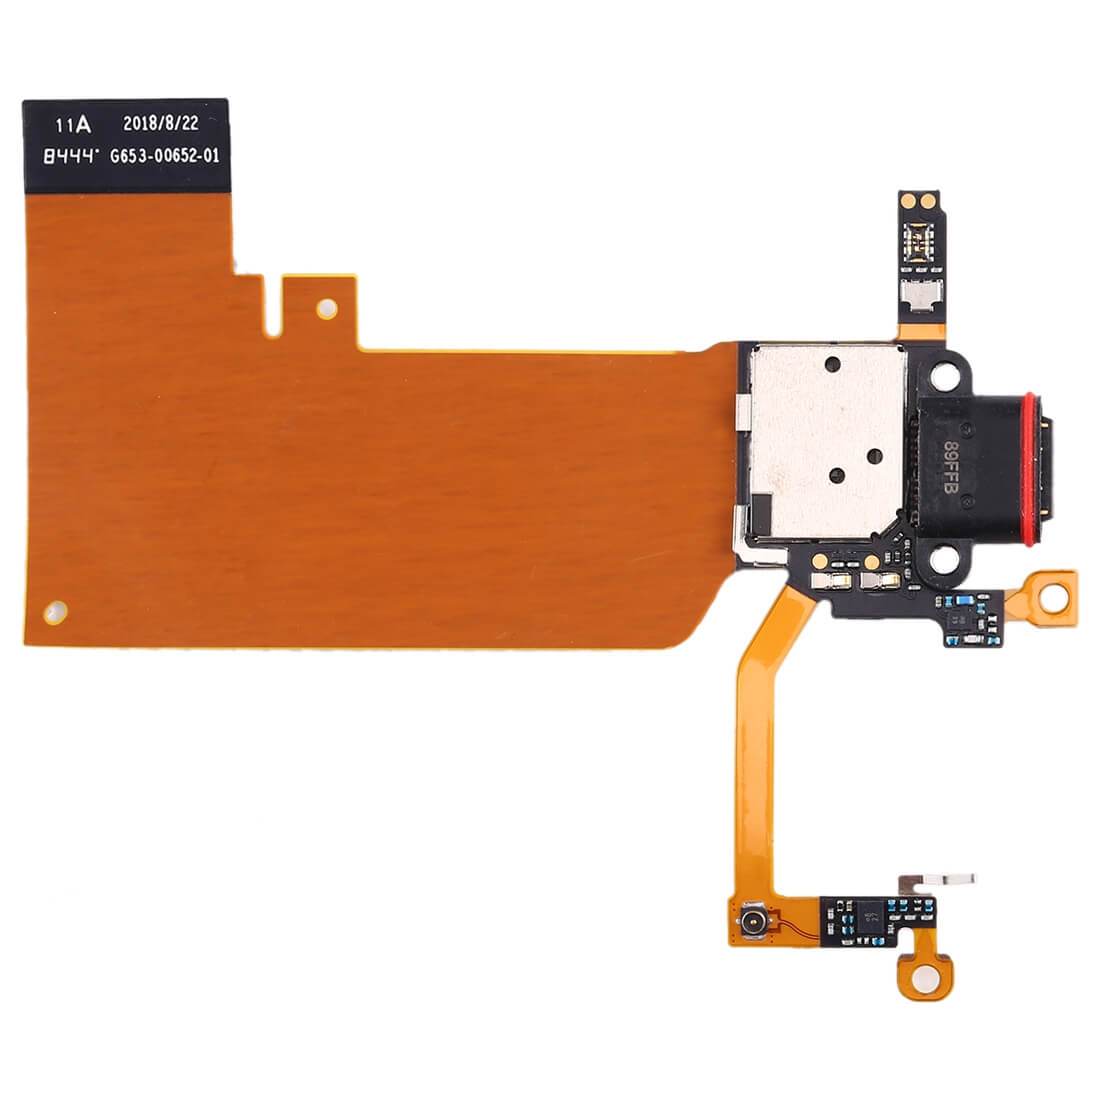 Replacement Charging Port Flex Cable For Google Pixel 4 - G653-00652